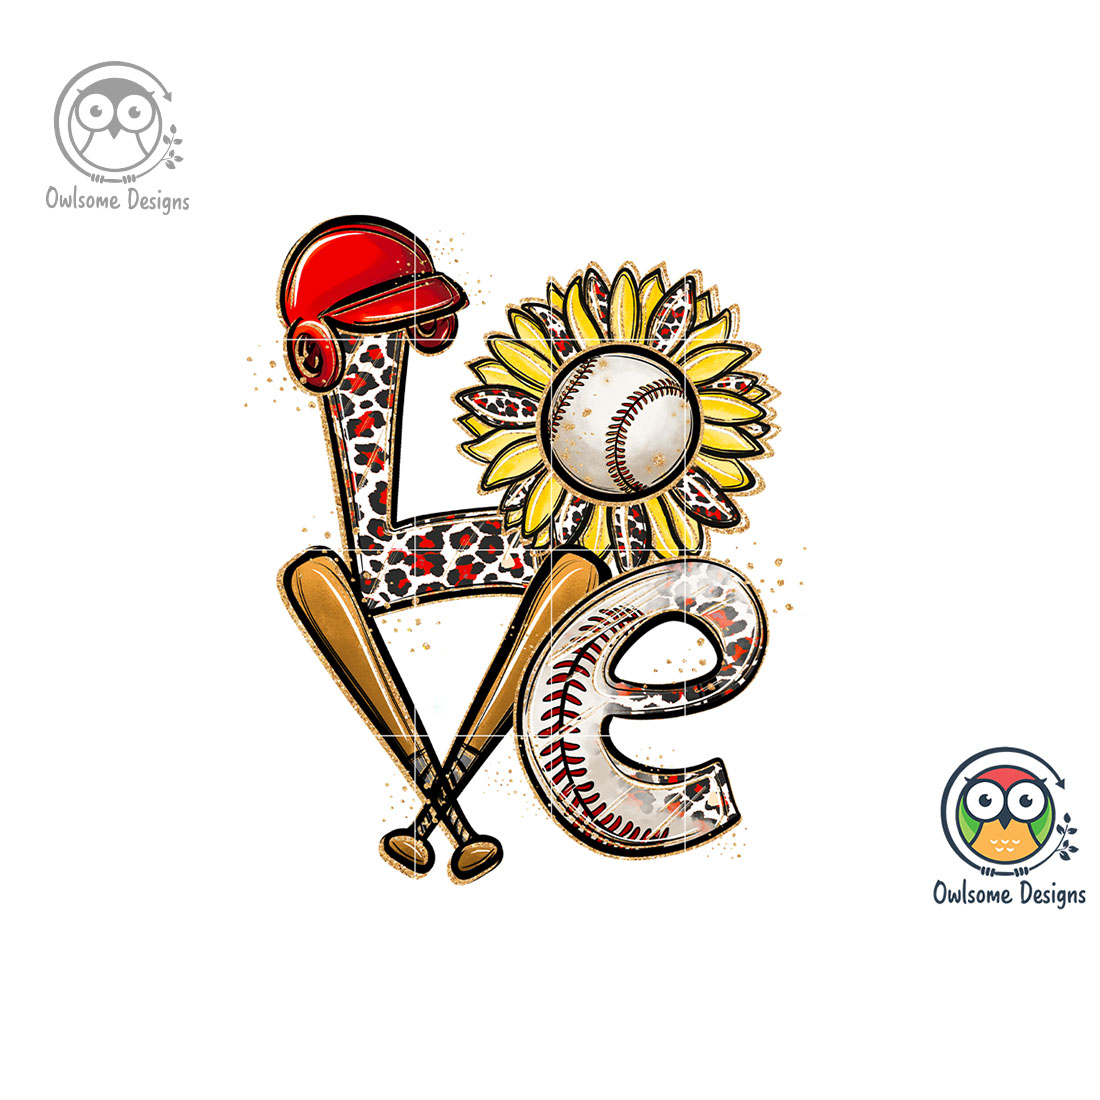 Image with great inscription love with baseball elements.